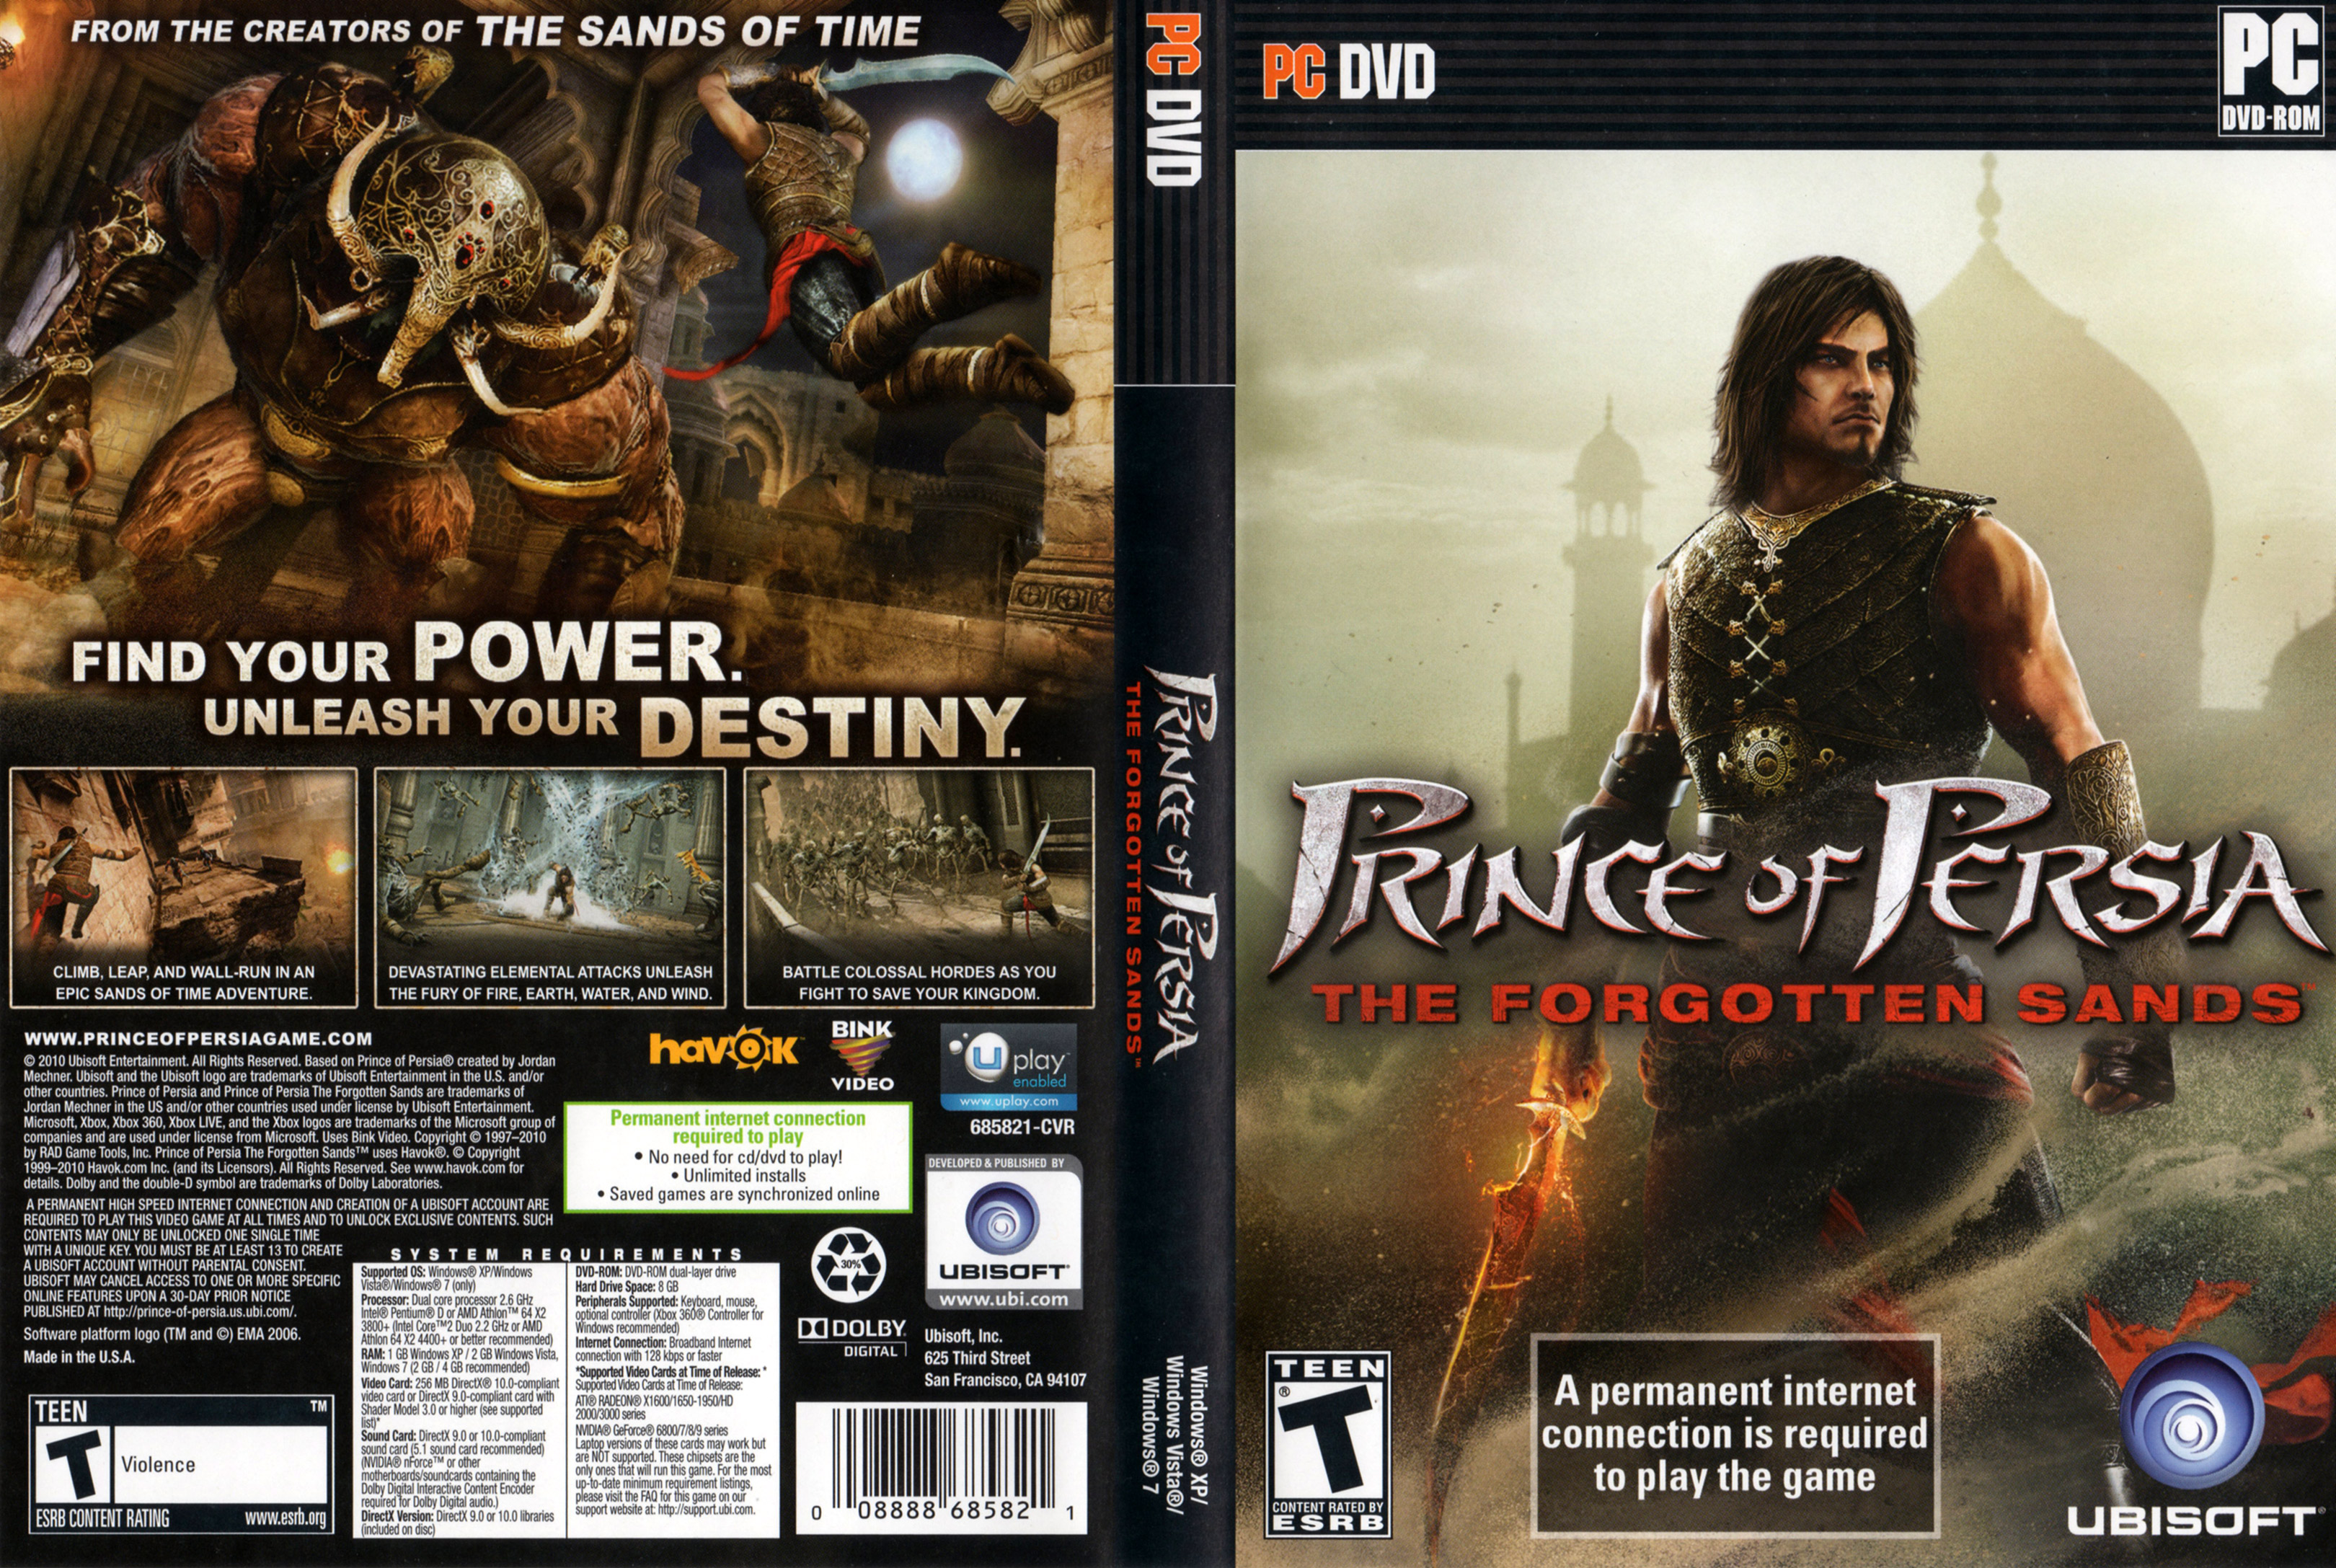 Prince of Persia: The Forgotten Sands - DVD obal 2